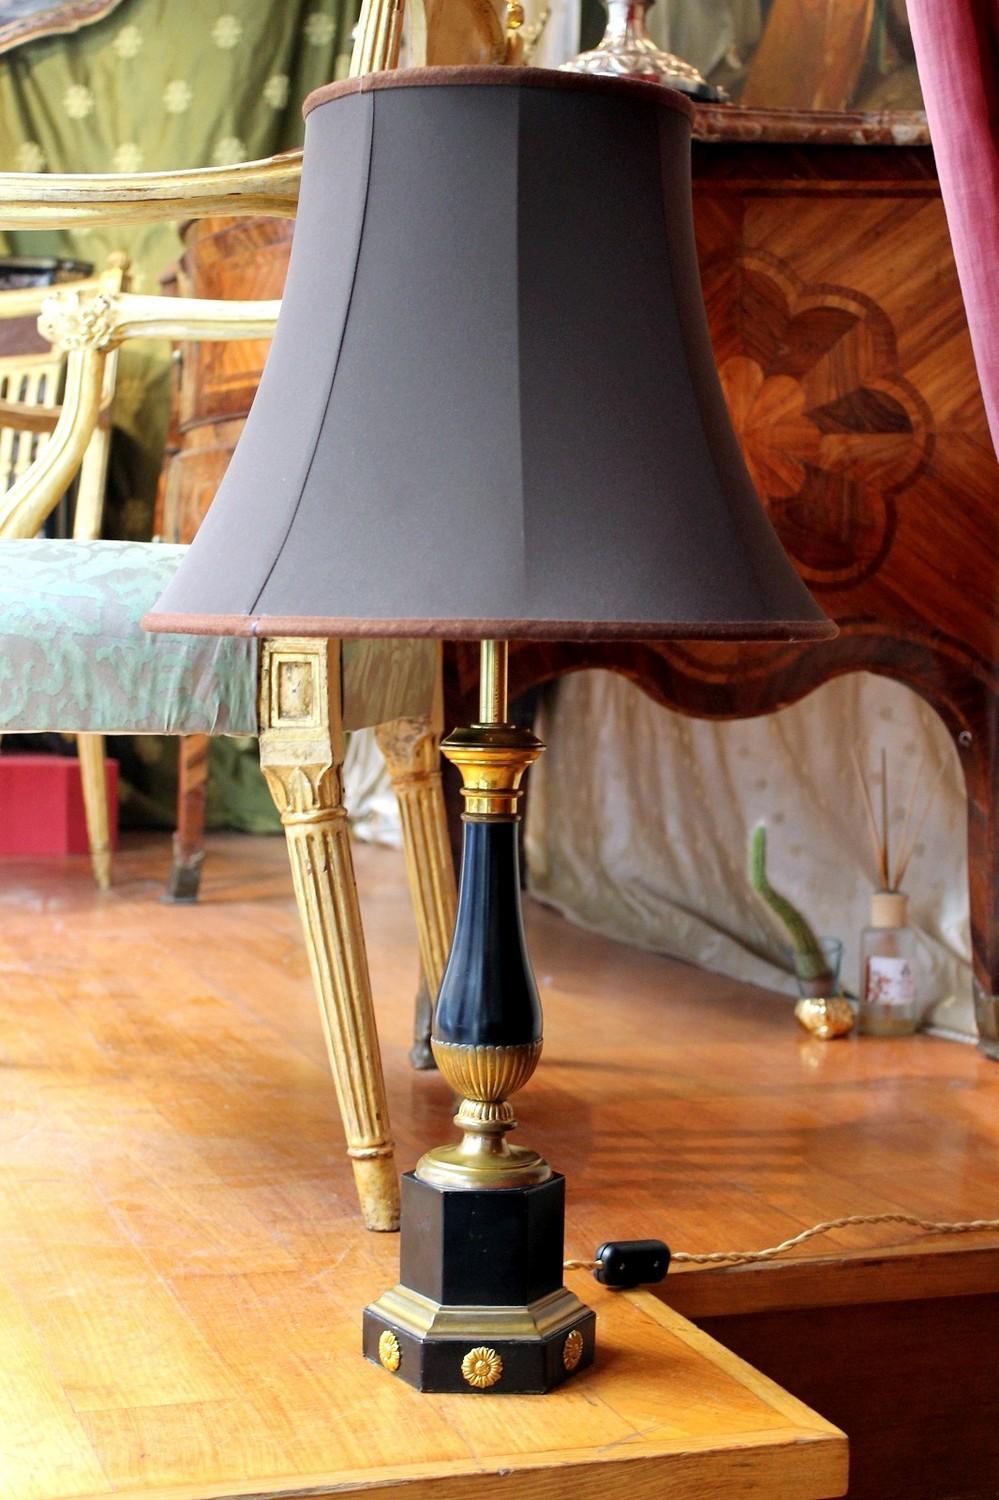 20th Century French Black Enamel Tole and Gilt Bronze Table Lamp with Silk Shade For Sale 7